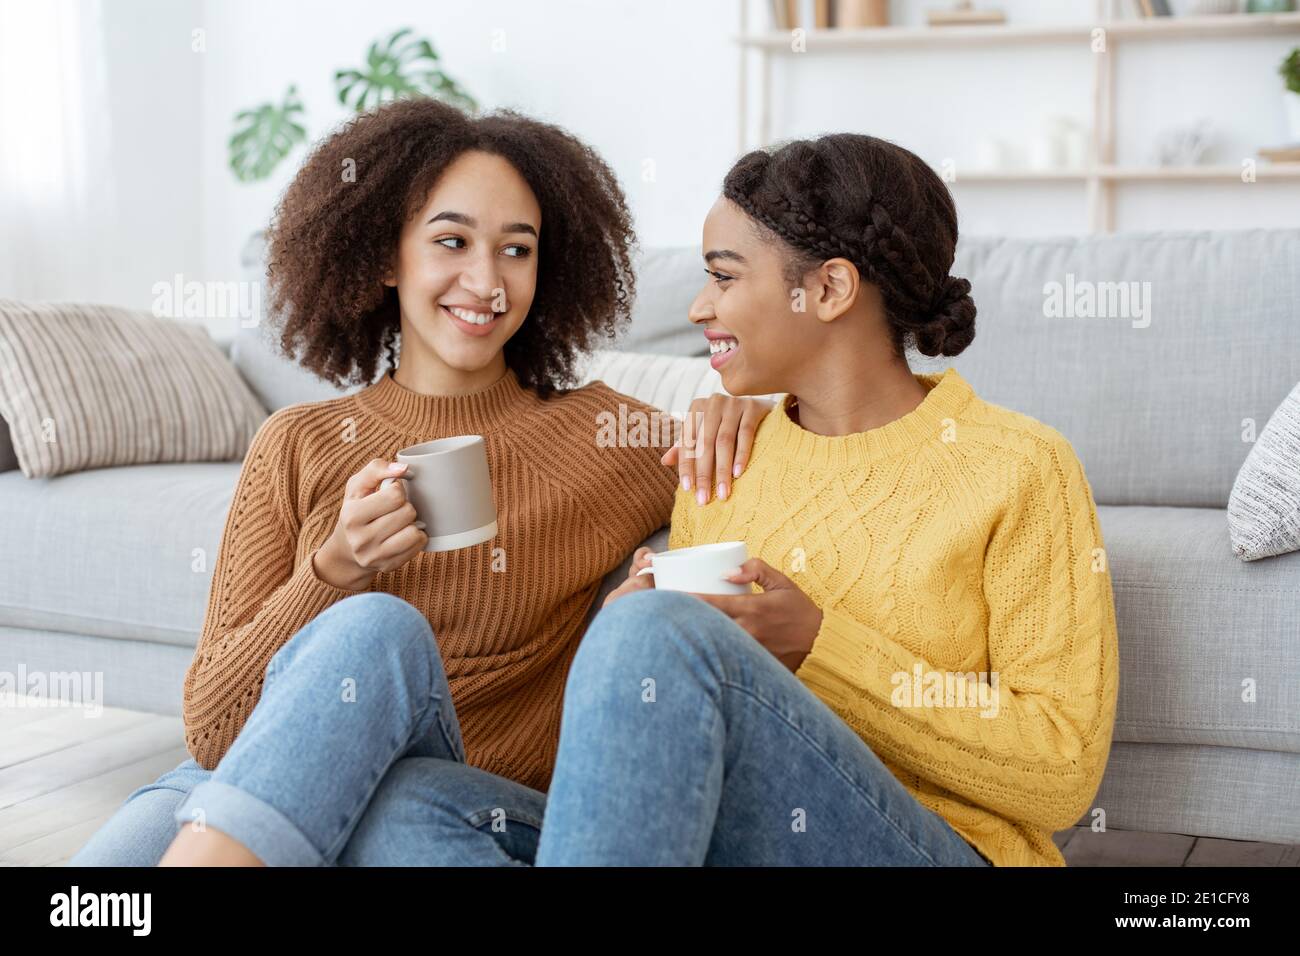 Females communication, gossip and modern date at home Stock Photo